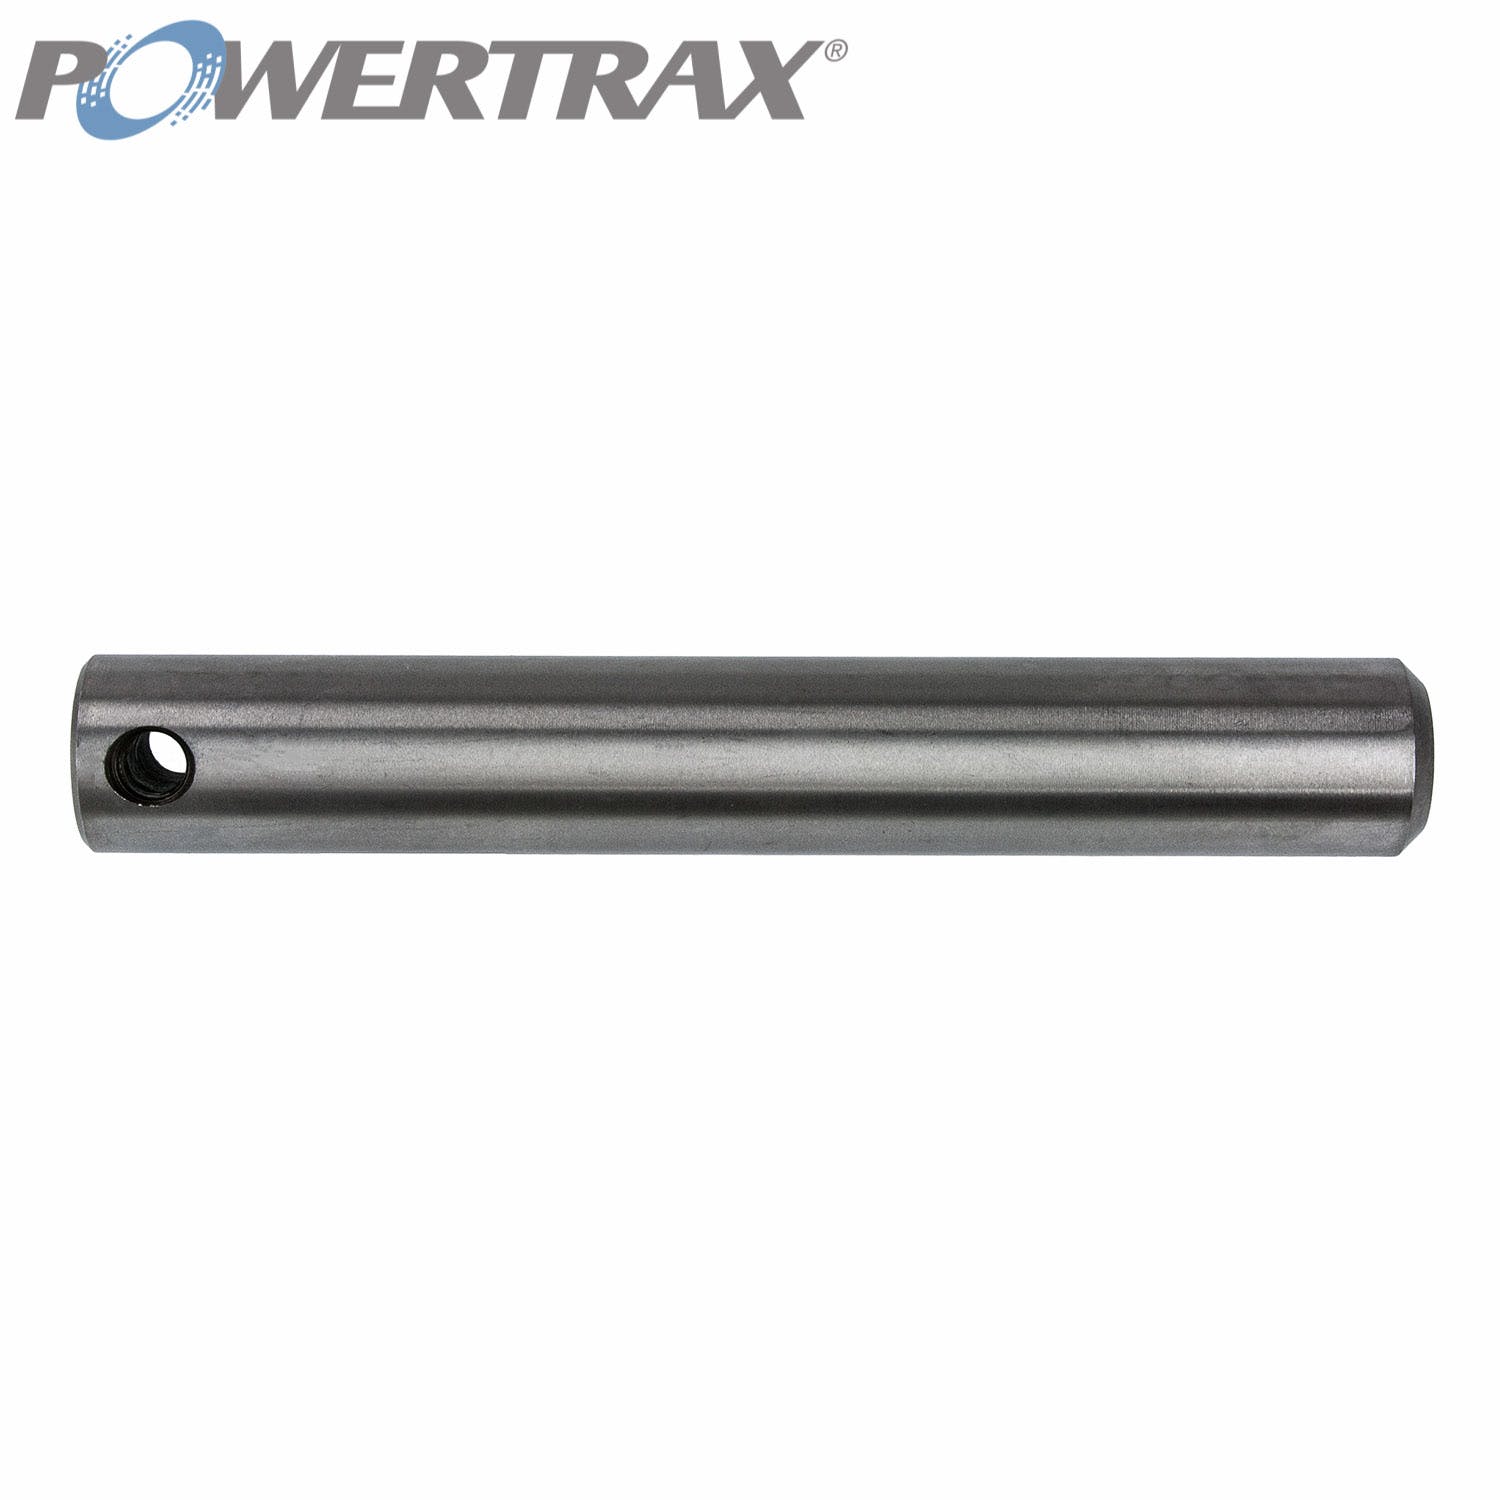 PowerTrax SD2410 Differential Pinion Shaft